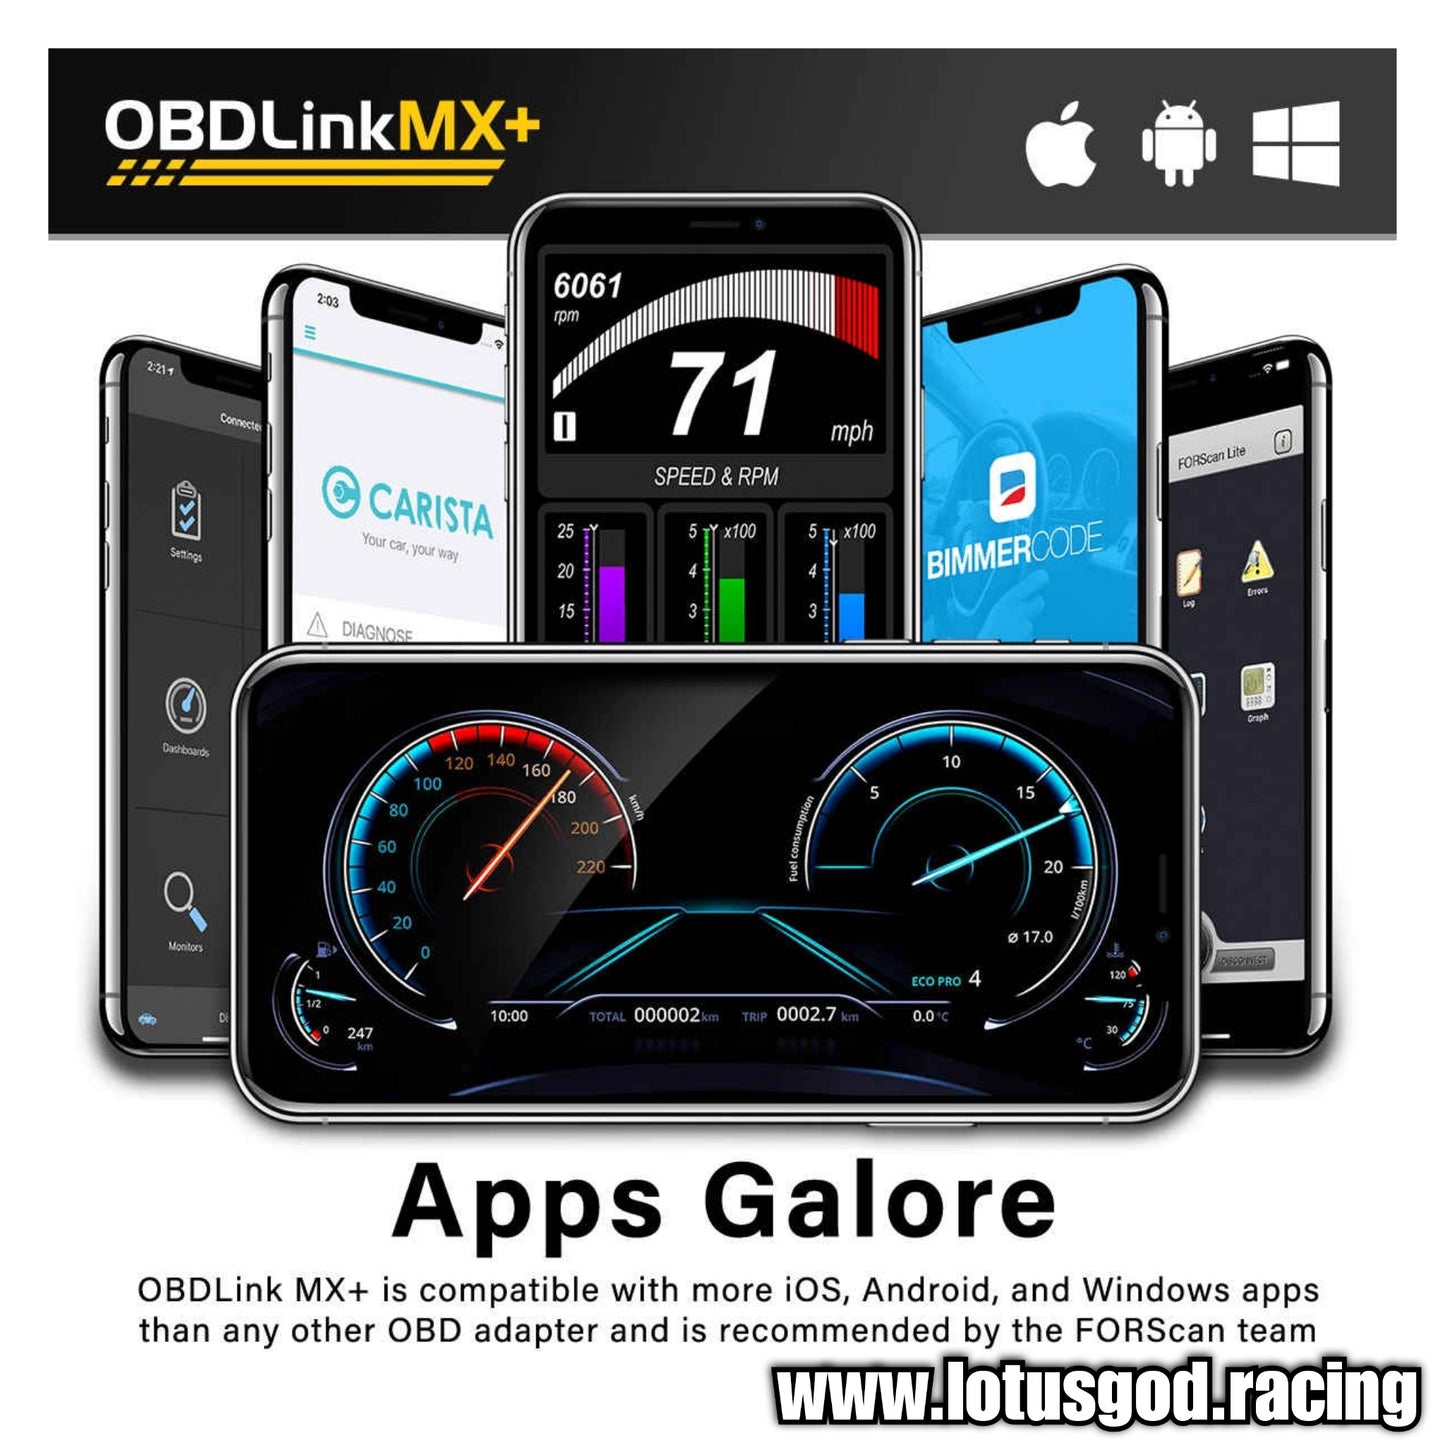 The Ultimate OBDLink MX + PLUS OBD2 Scanner Diagnostic Scan Wireless Bluetooth Obd Car Vehicle Tool for Apple iOS Android, Kindle Fire or Windows Device